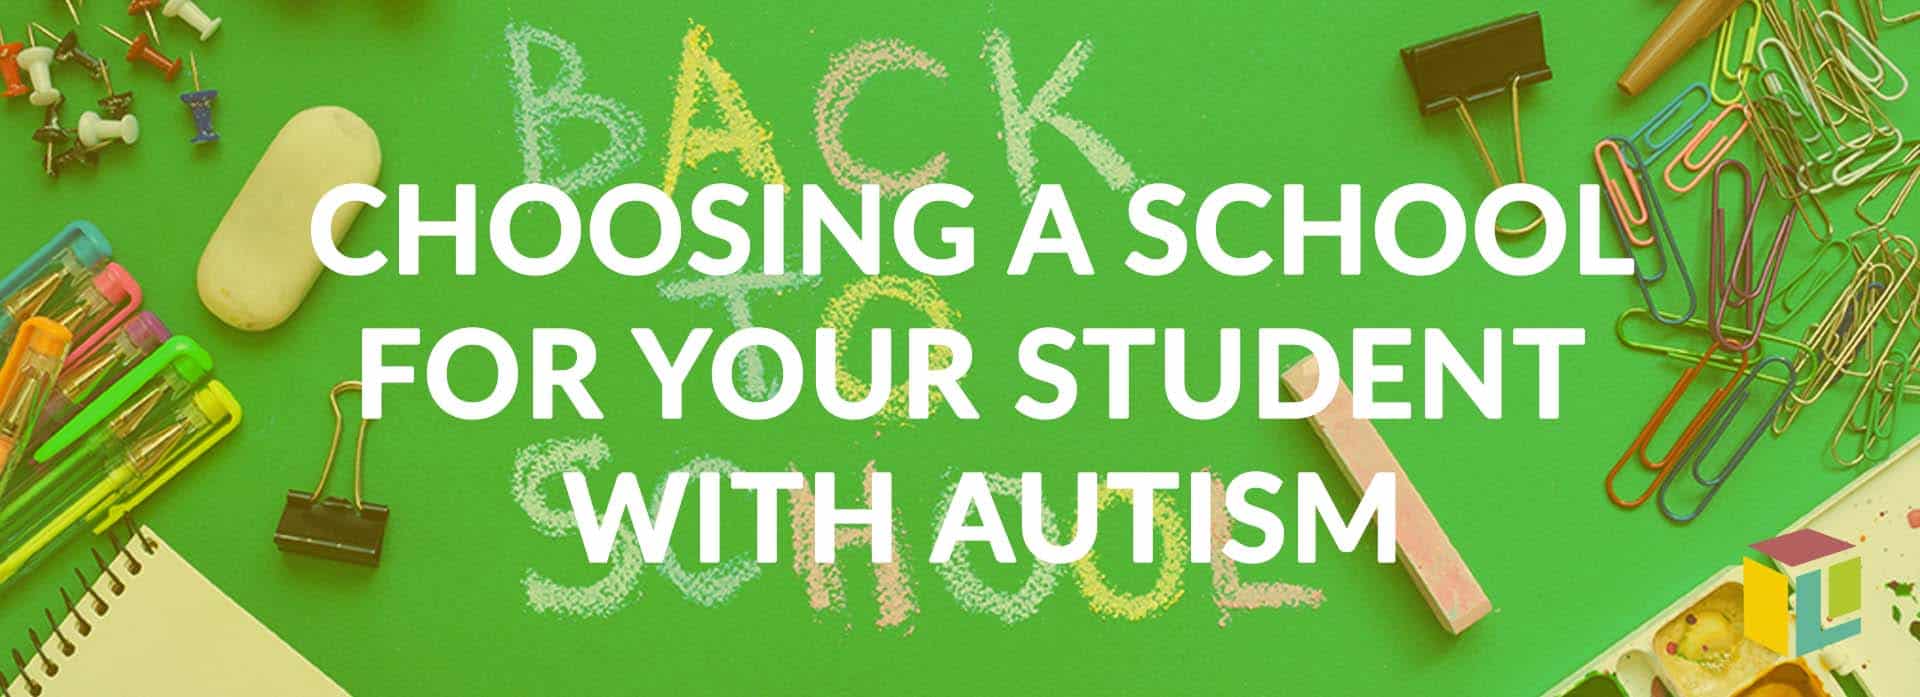 Choosing A School For Your Student With Autism